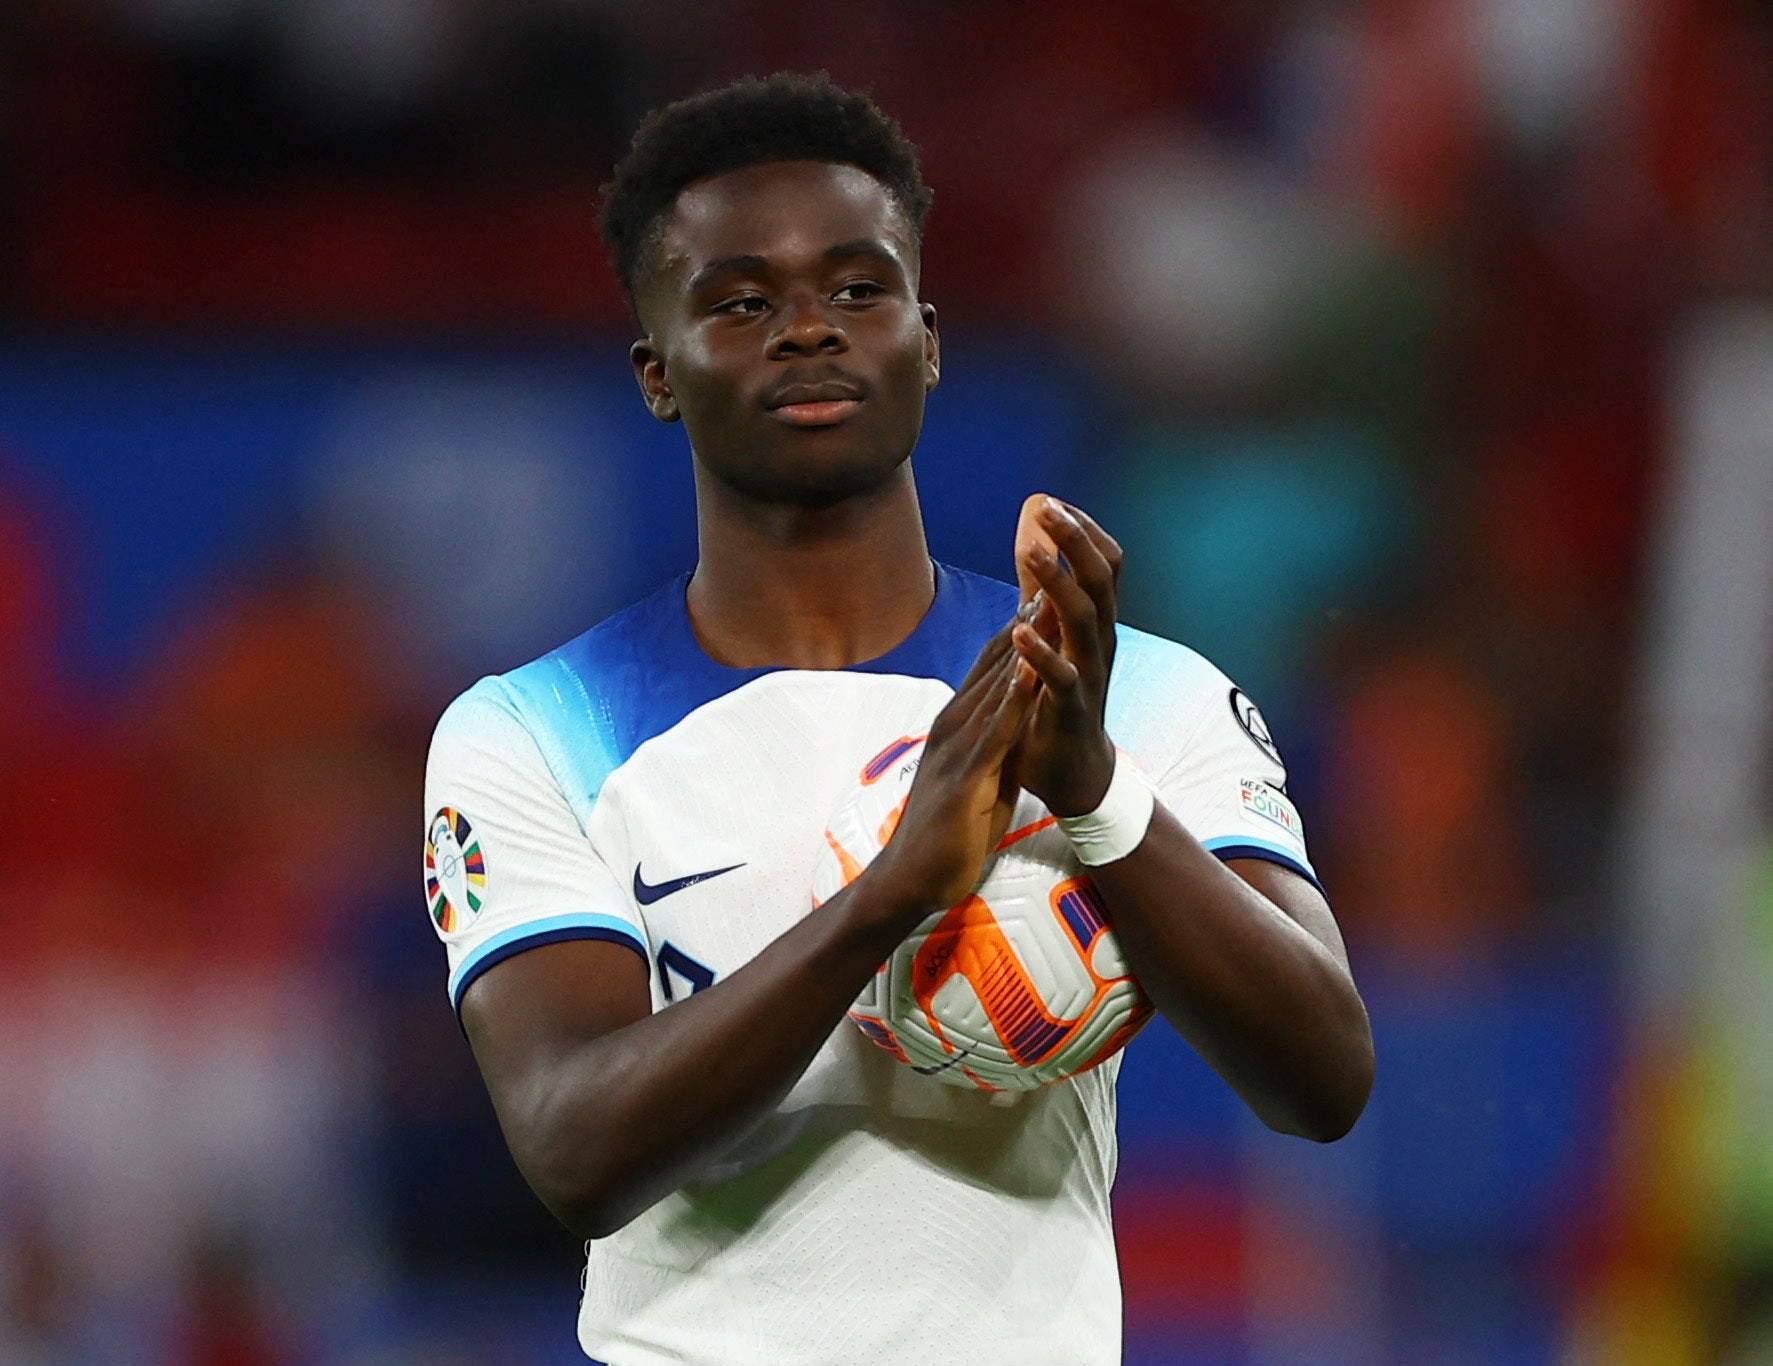 Exceptional' Bukayo Saka lauded by Gareth Southgate after England hat-trick  | The Independent